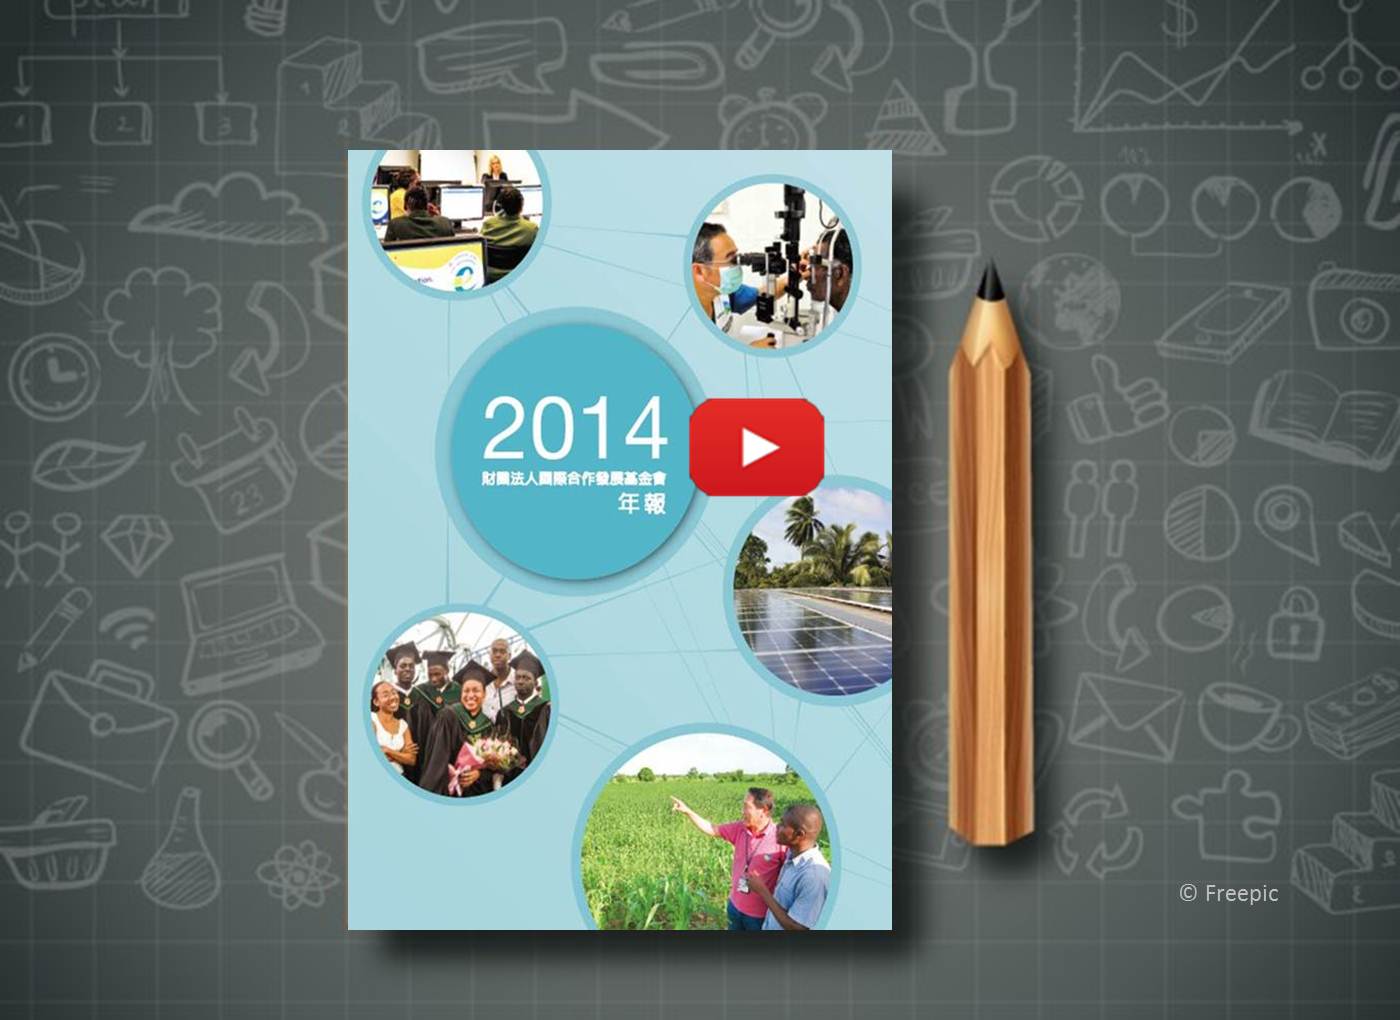 TaiwanICDF 2014 Annual Report in short video